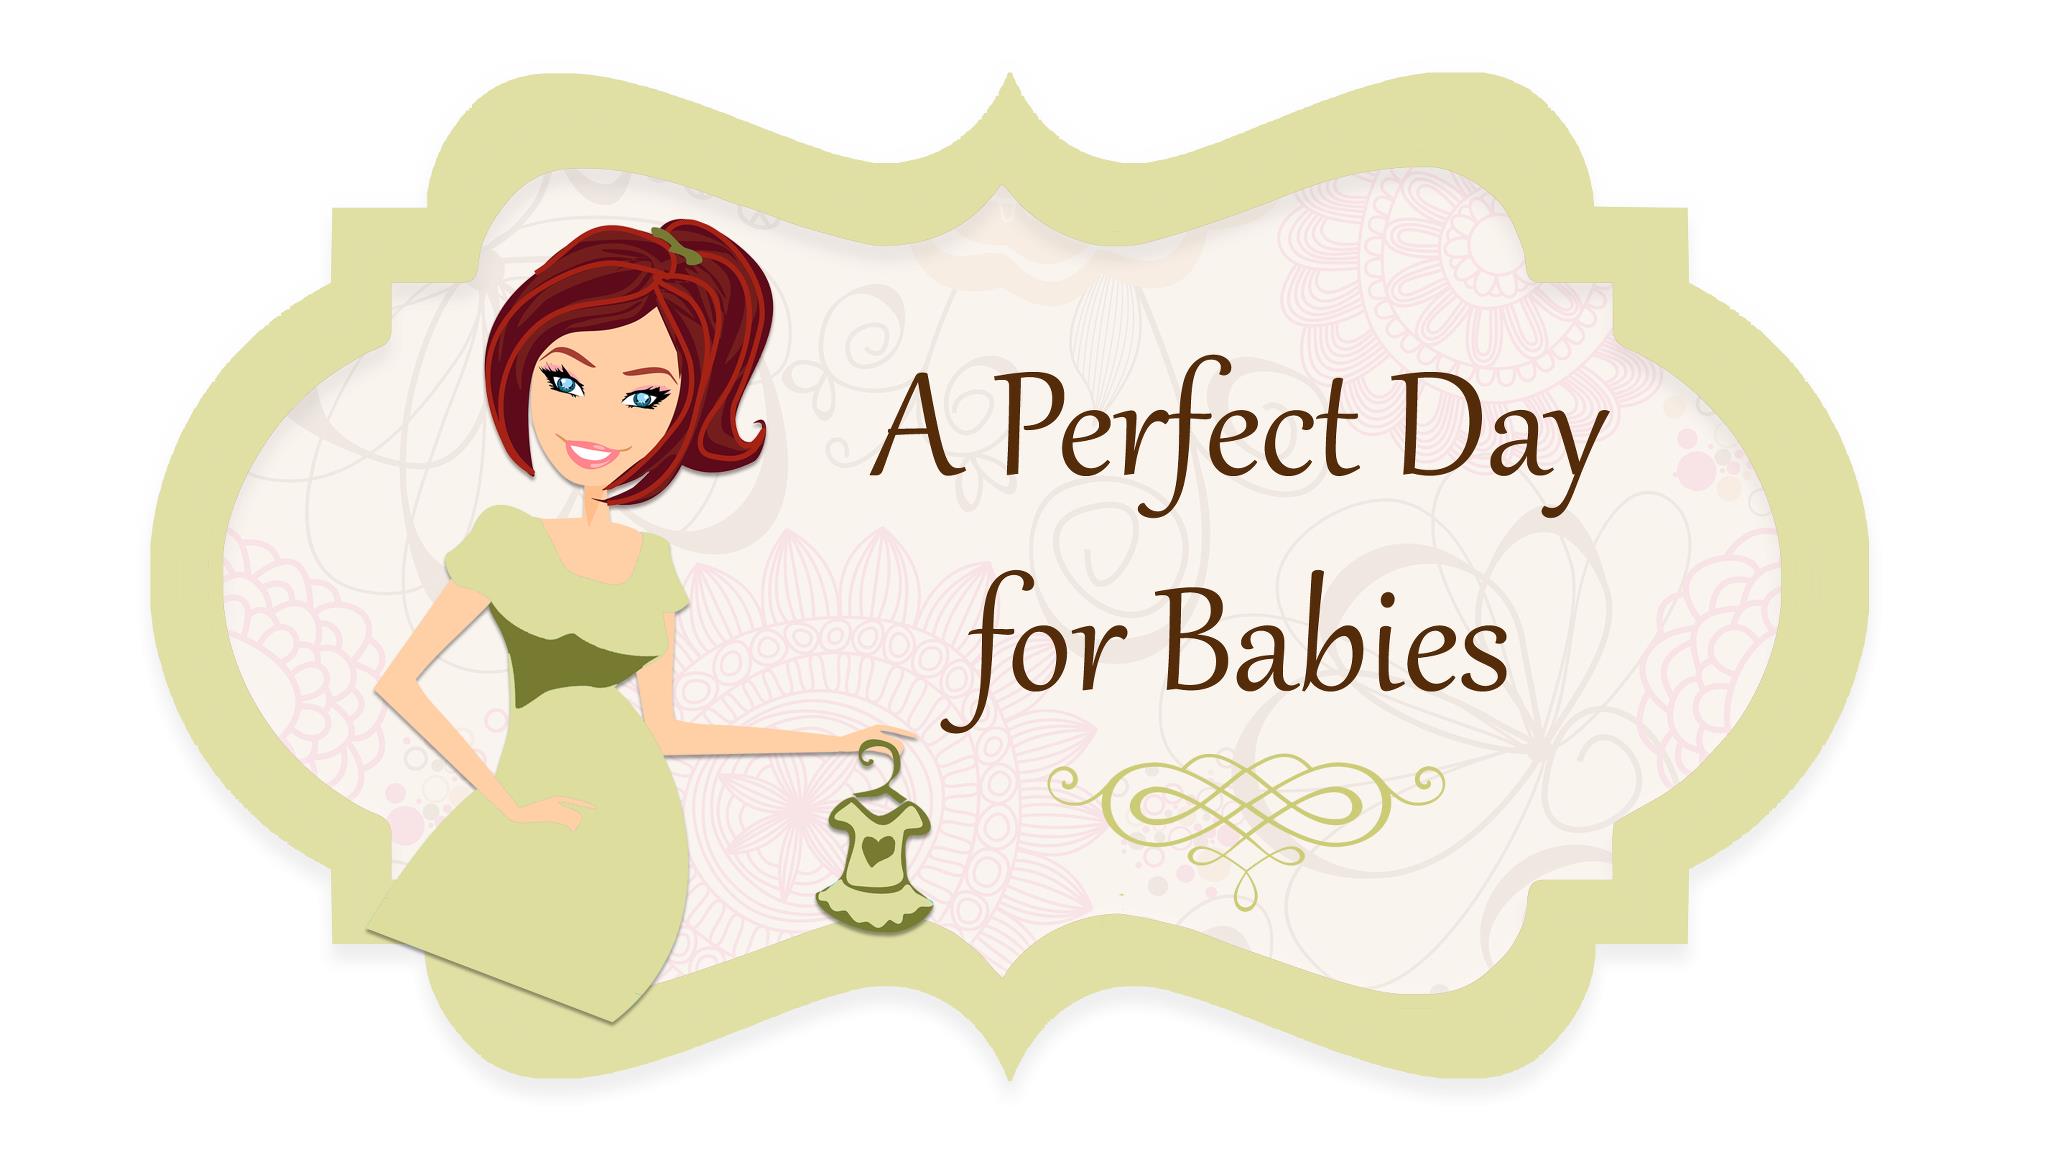 A Perfect Day for Babies